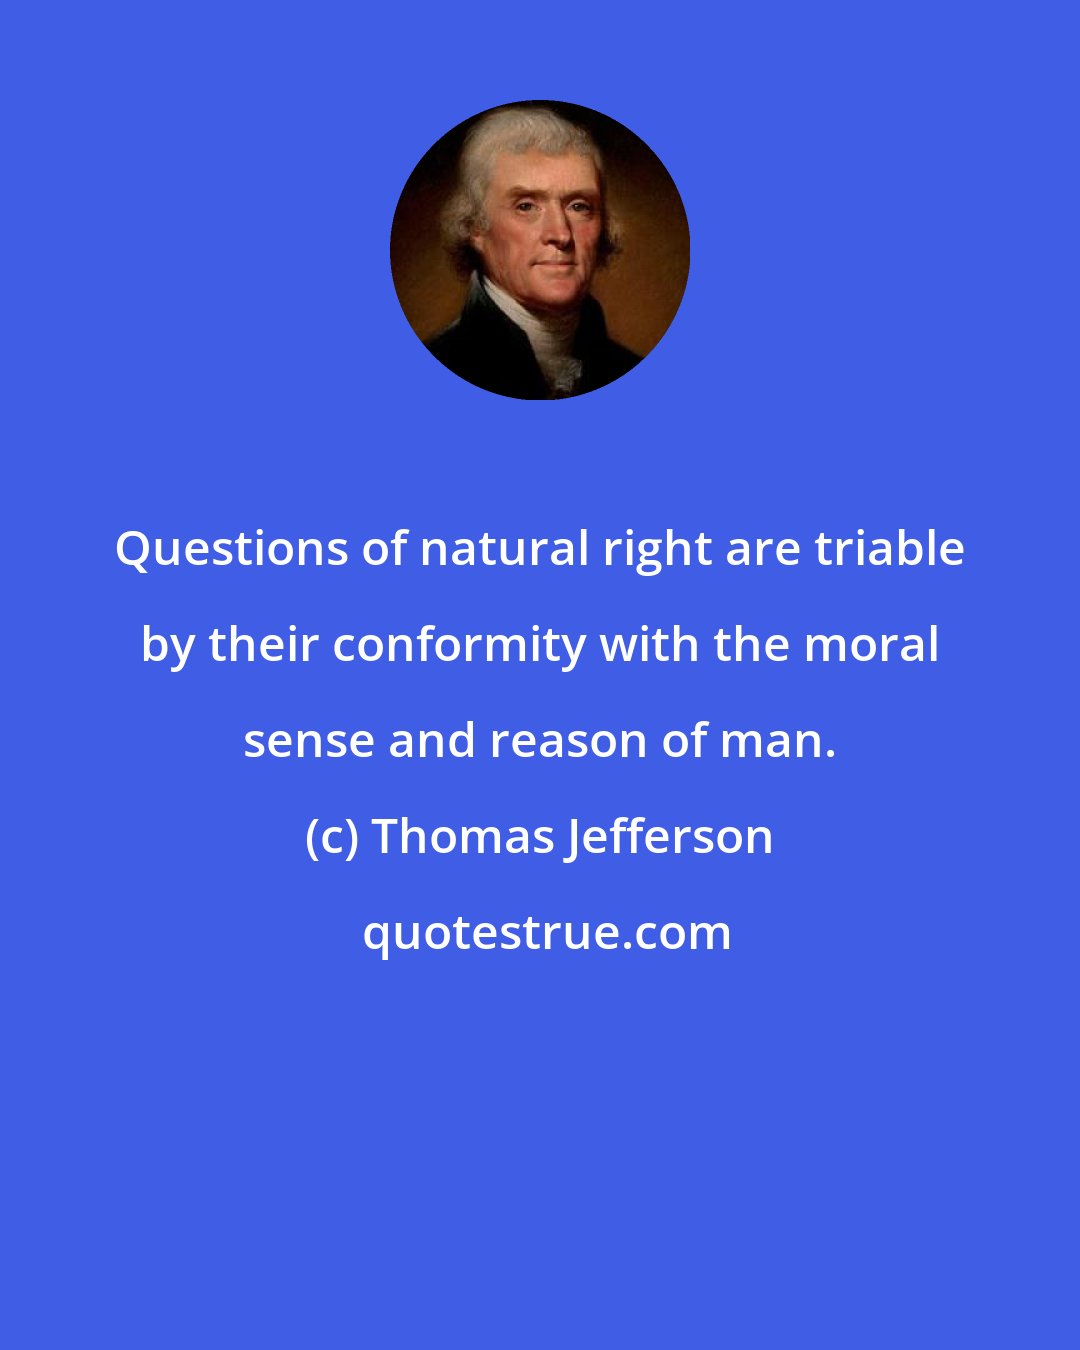 Thomas Jefferson: Questions of natural right are triable by their conformity with the moral sense and reason of man.